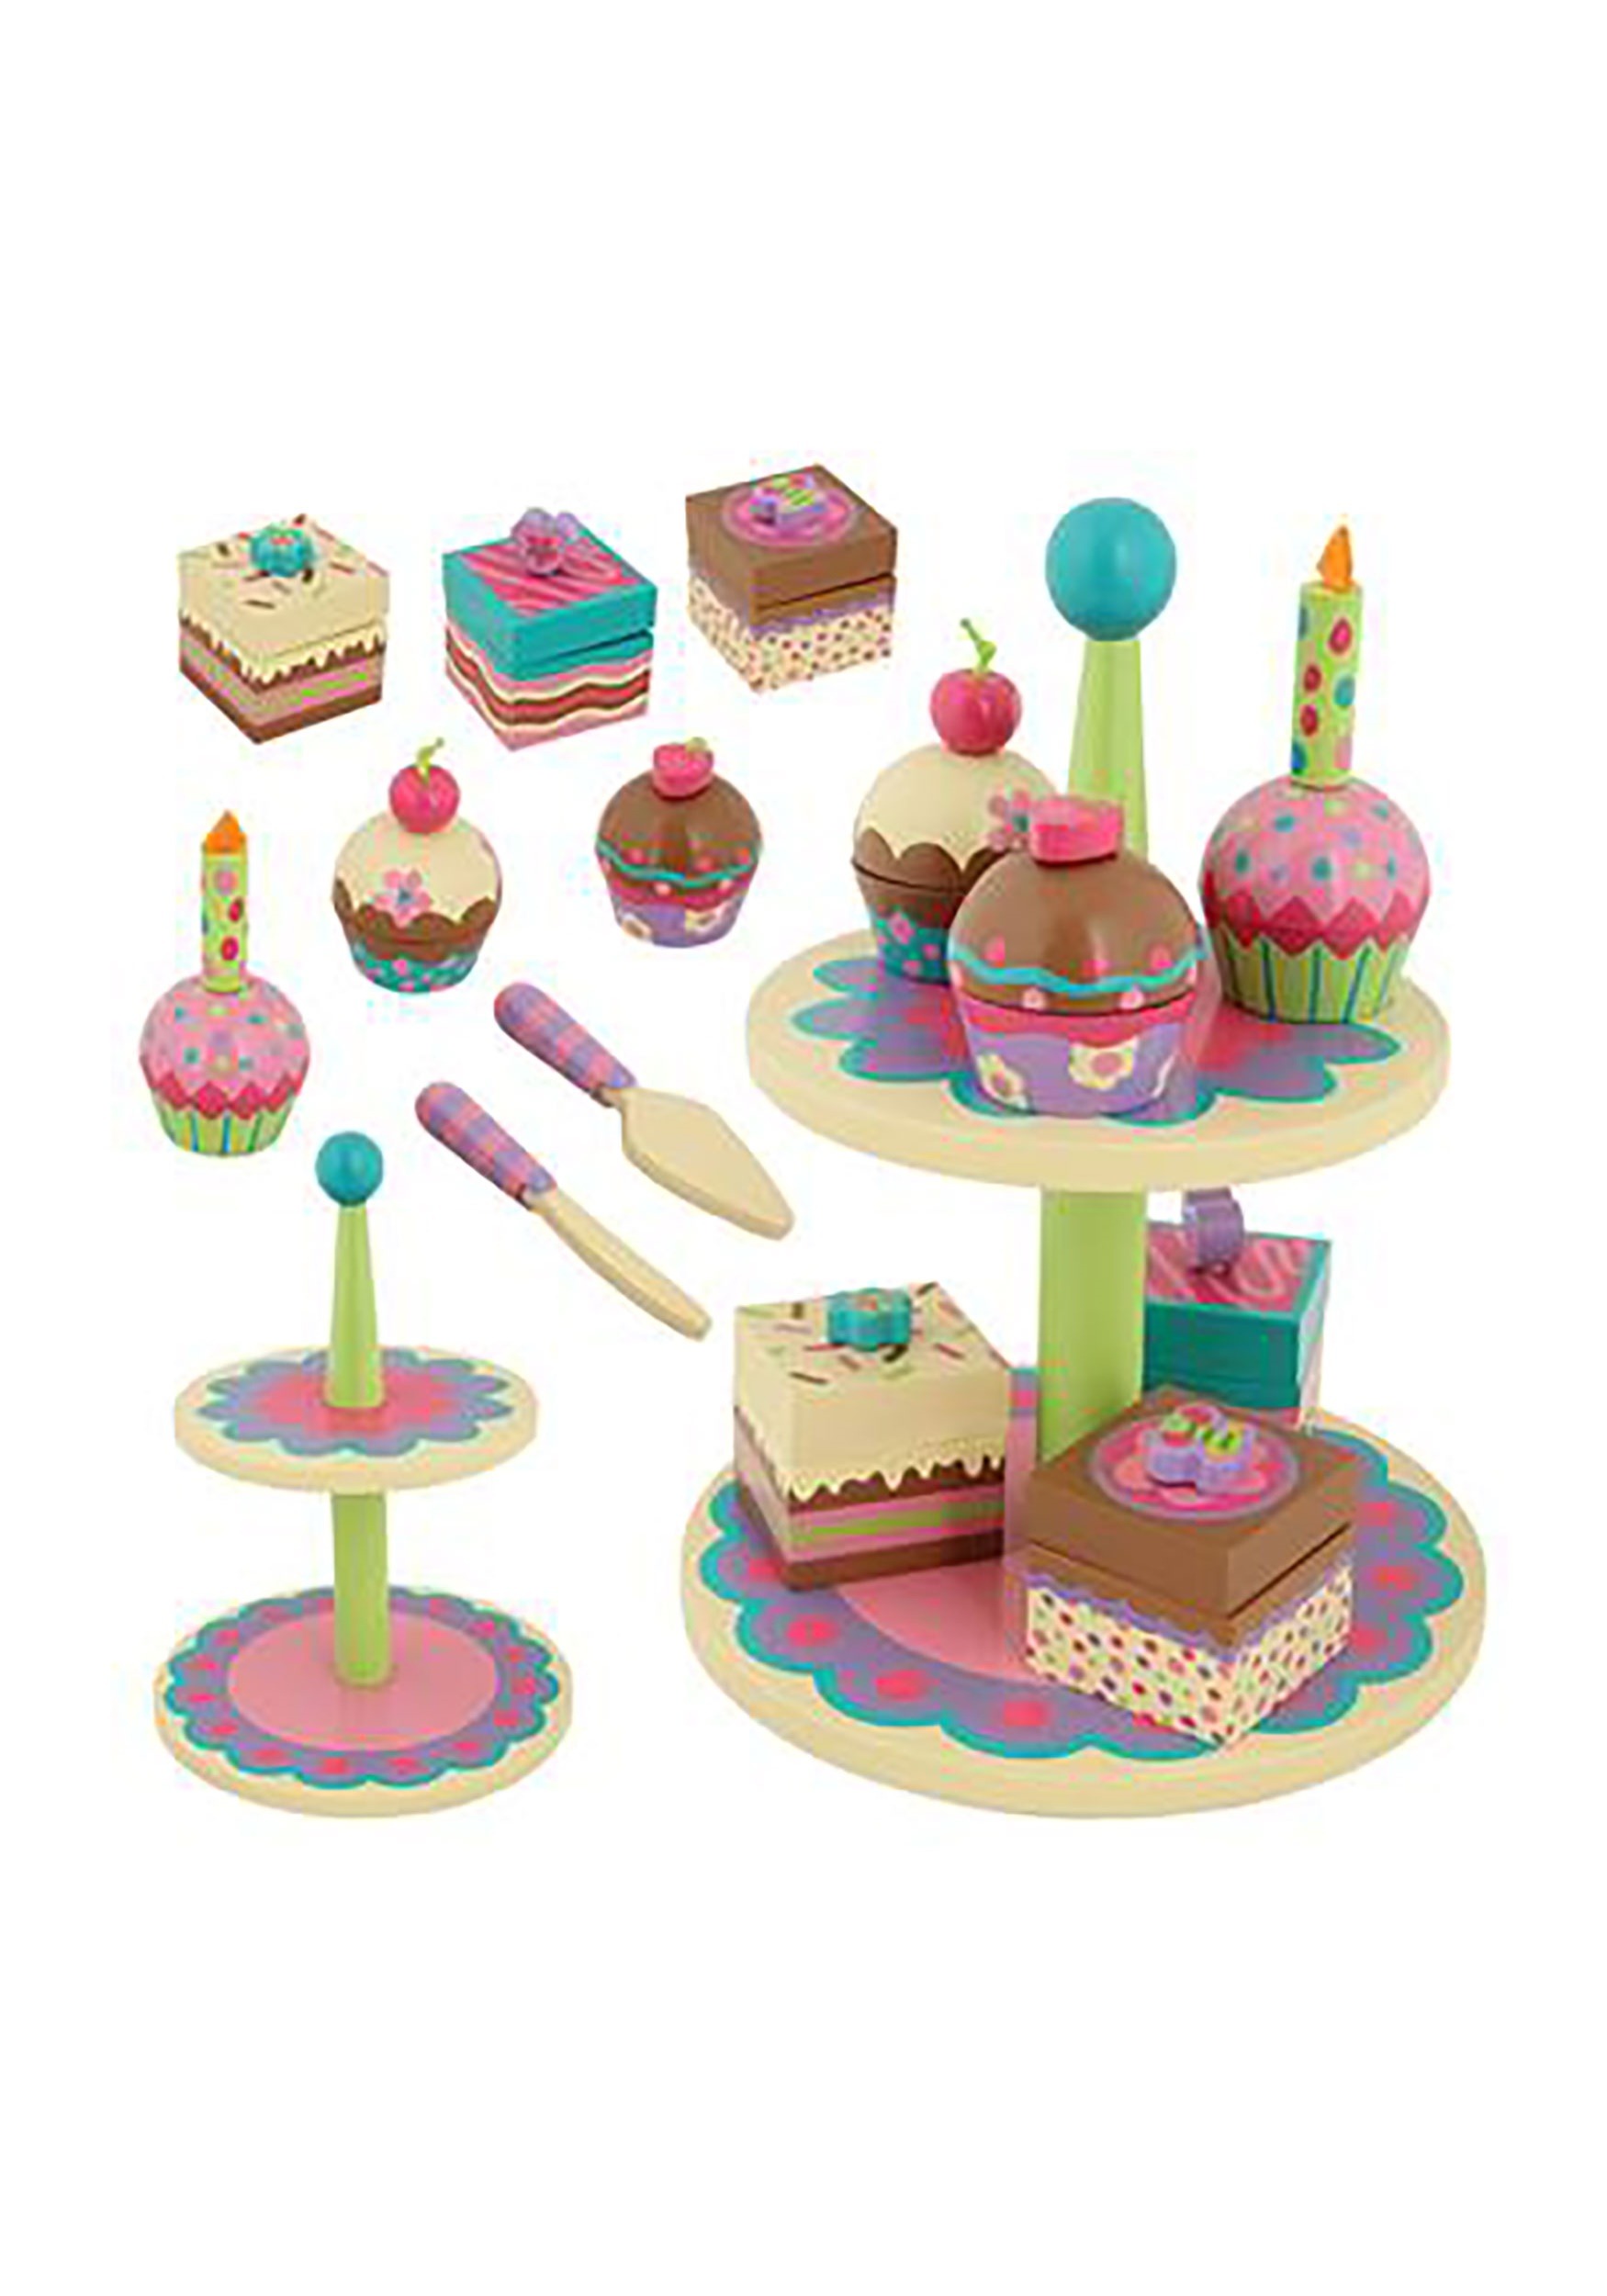 Stephen Joseph Wooden Cupcake and Sweets Toy Set